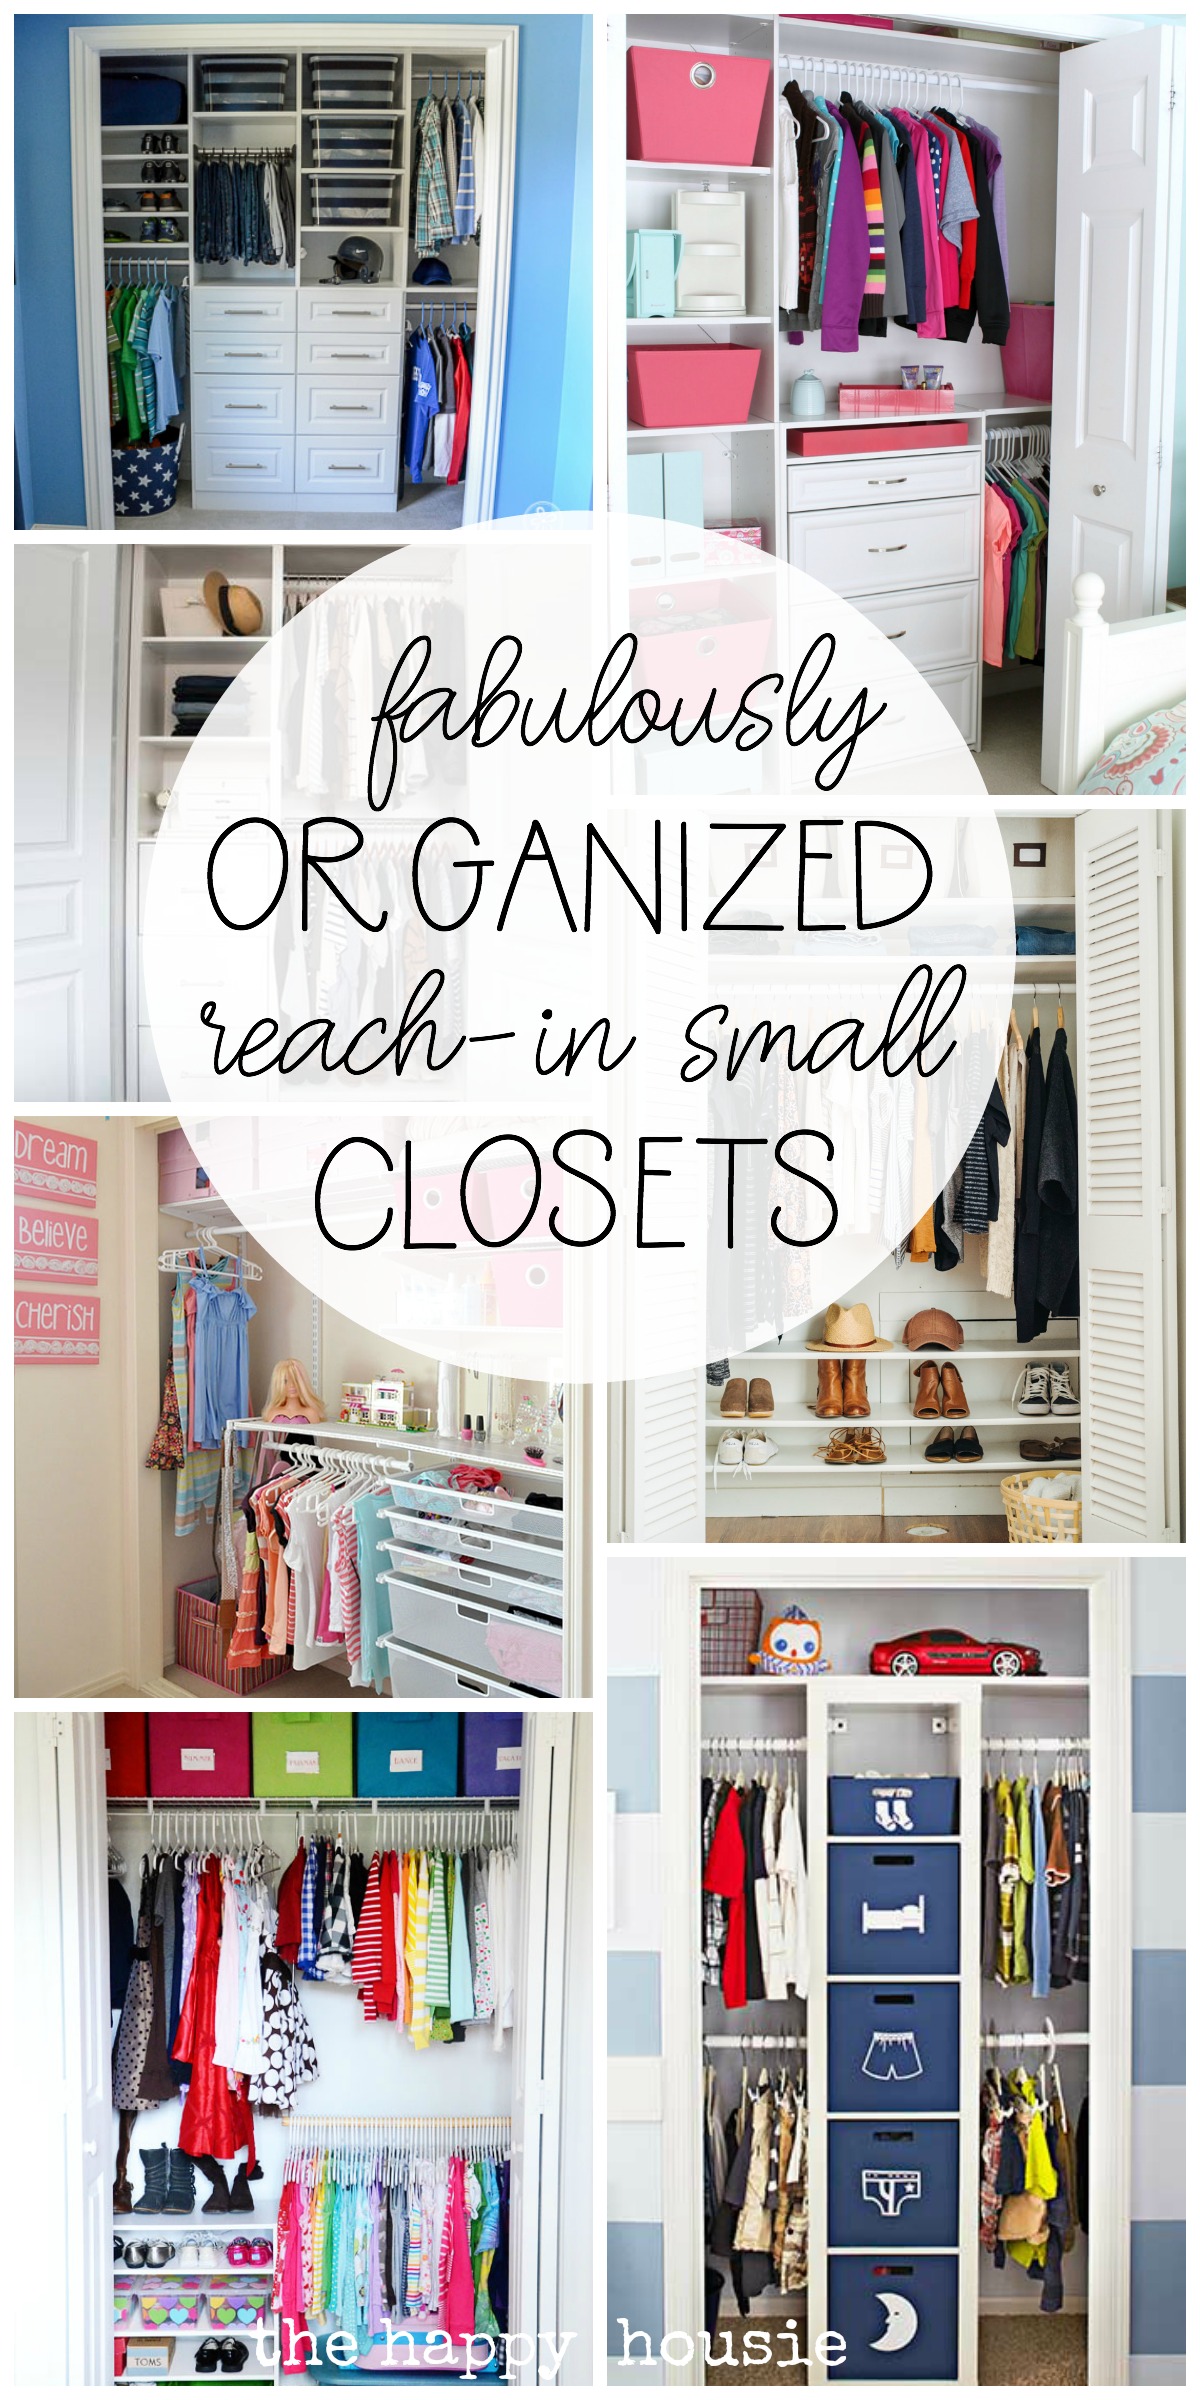 Fabulously organized reach-in small closets graphic.